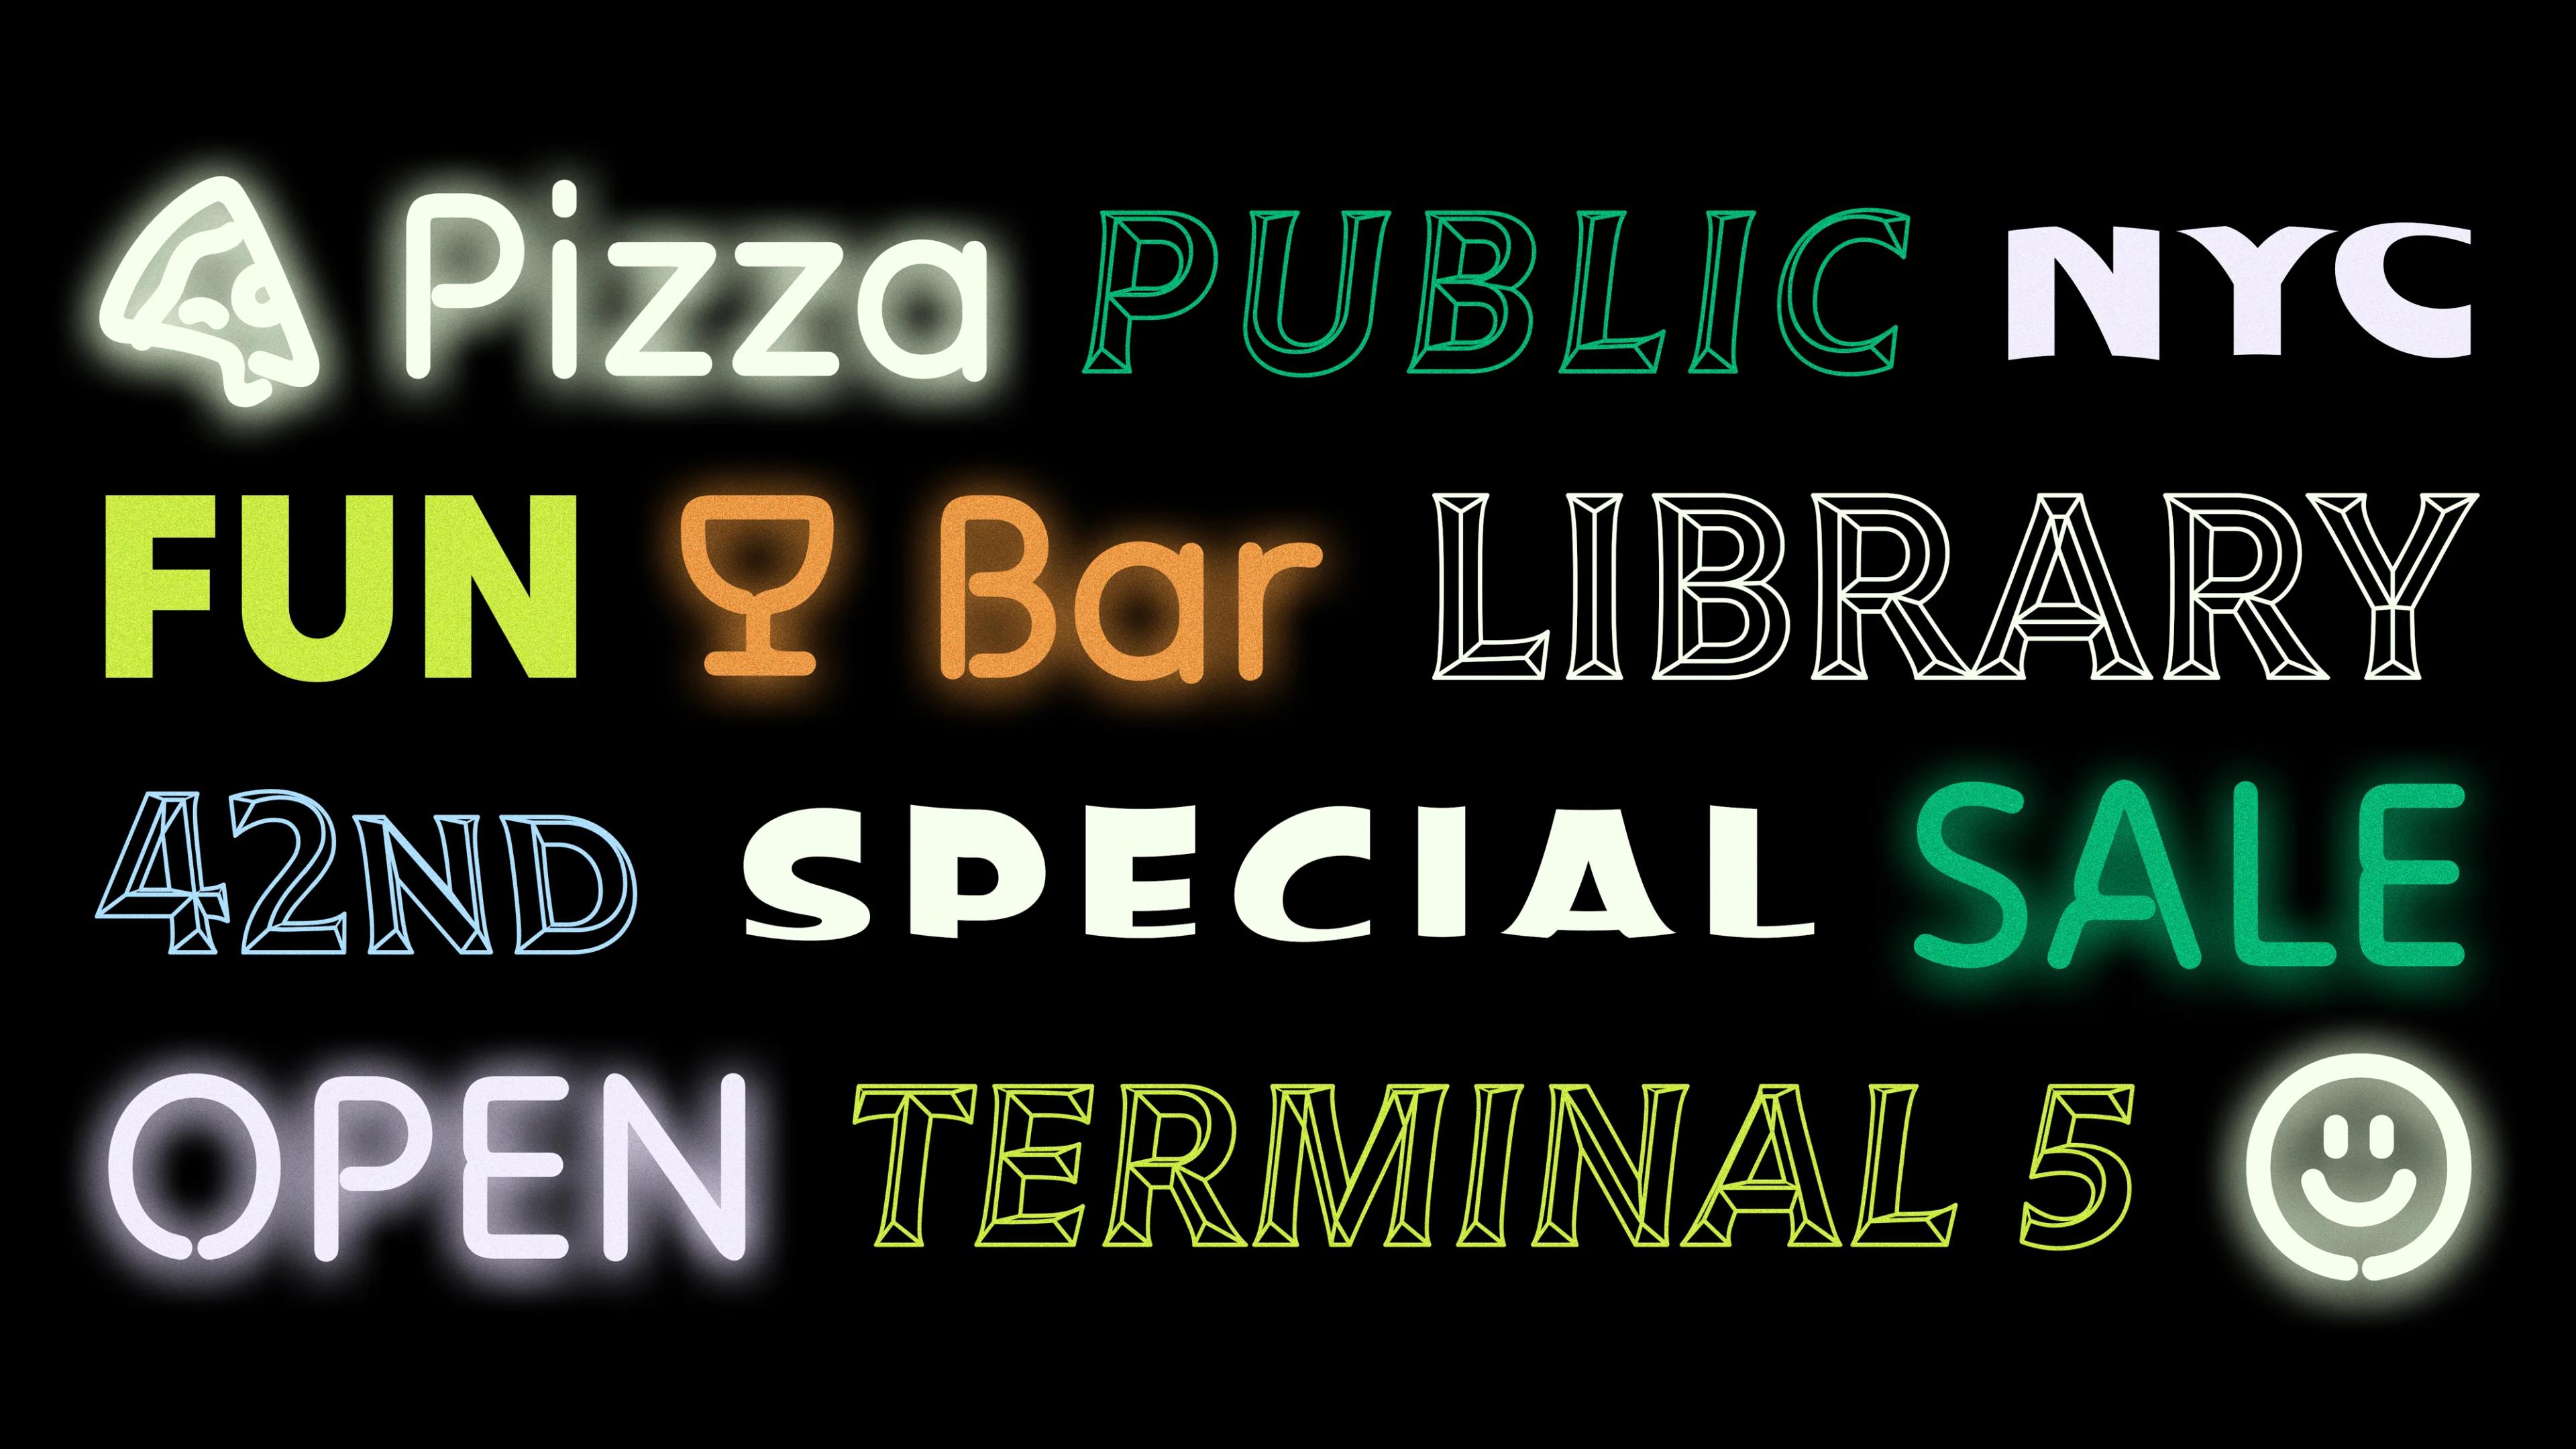 Collage view of various fonts in multiple colors